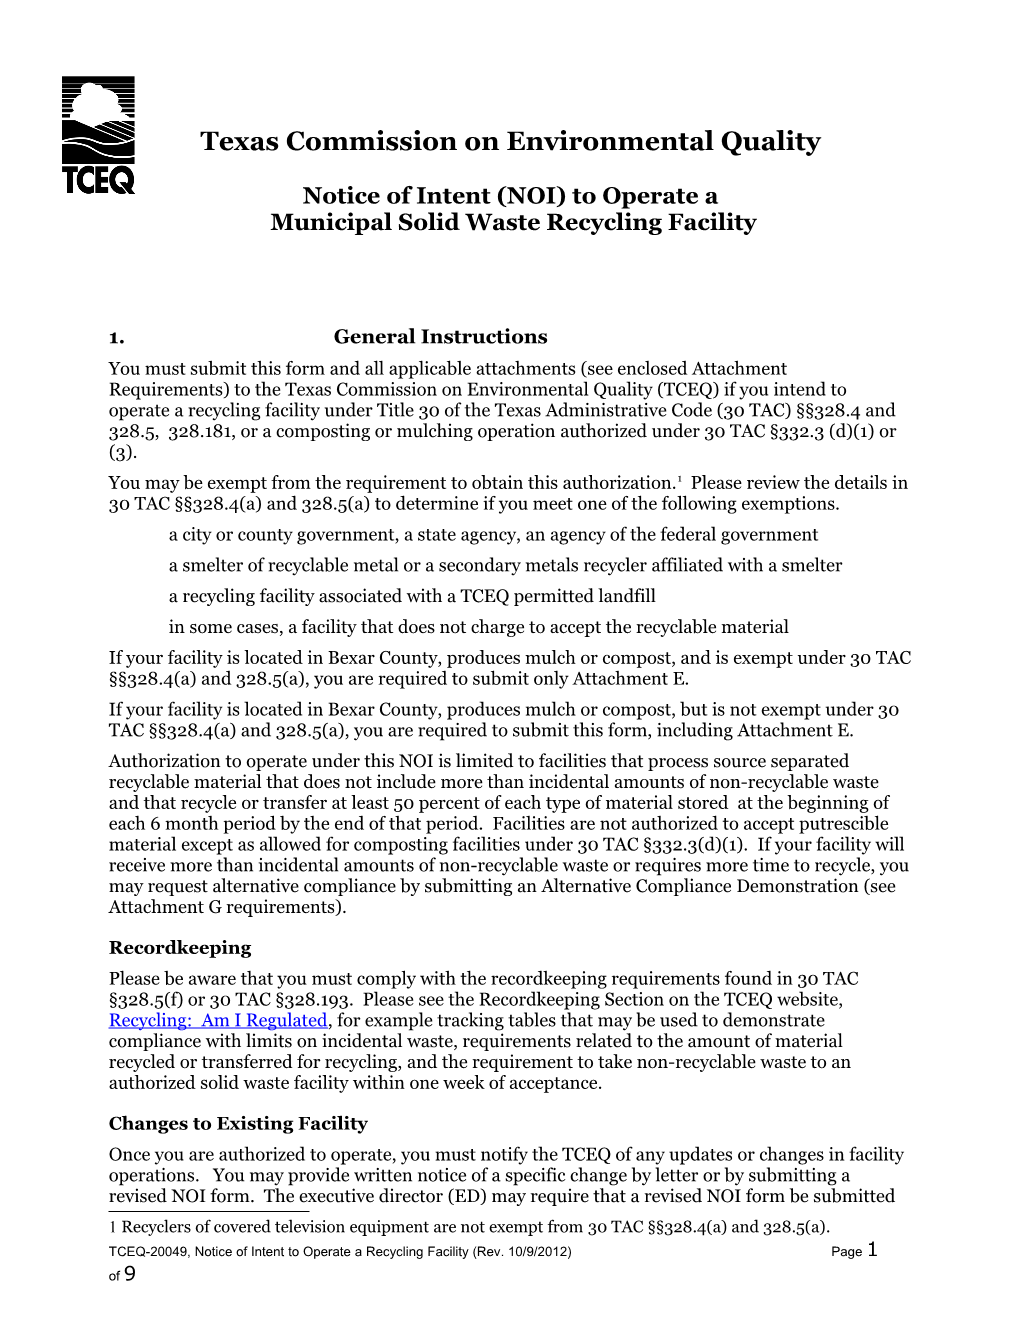 Notice of Intent (NOI) to Operate a Recycling Facility Under 30 TAC Sections 328.4 and 328.5